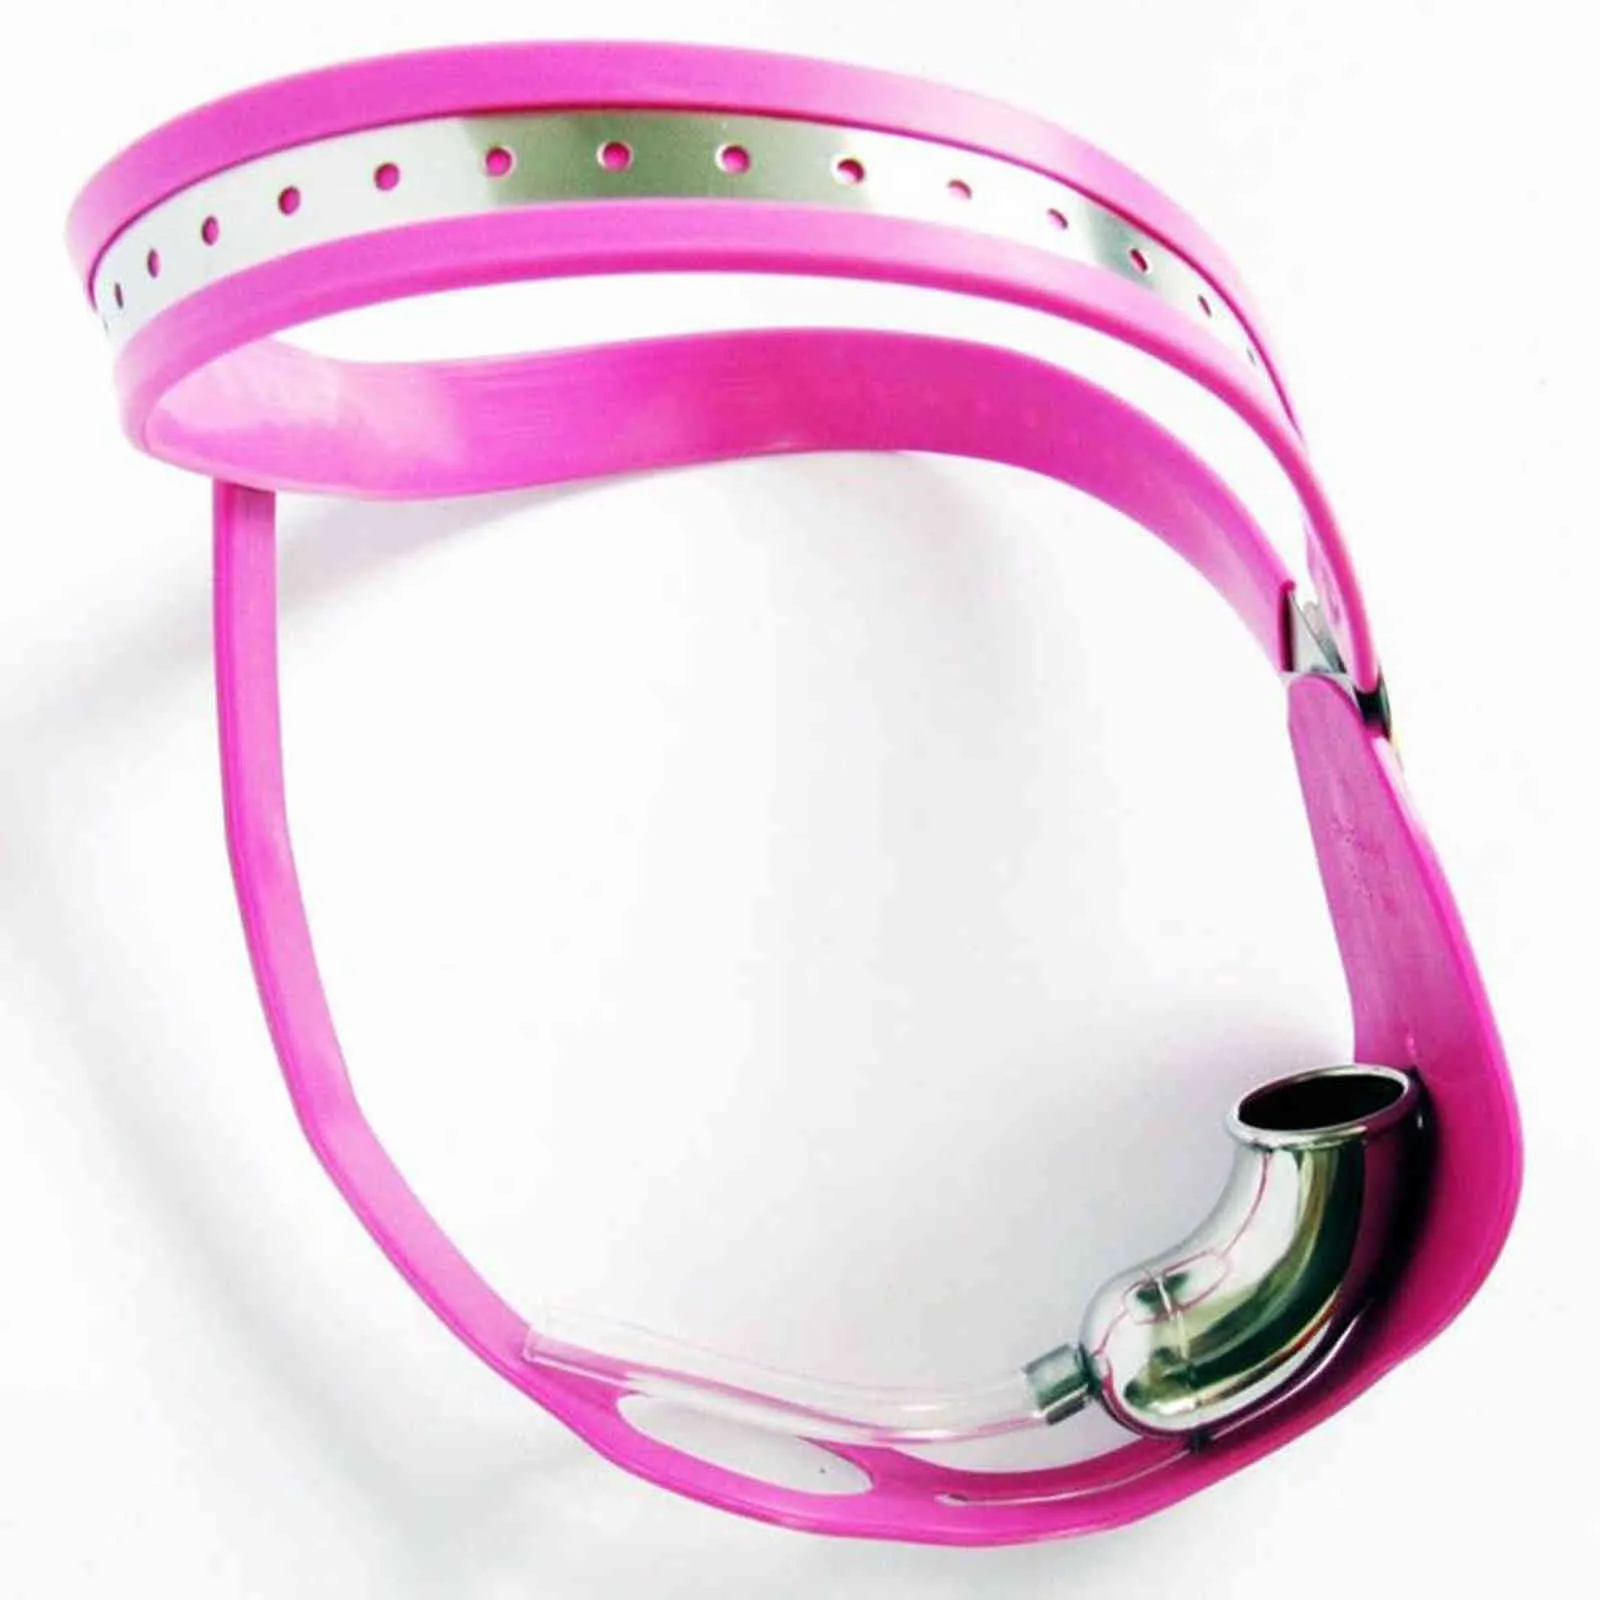 NXY Cockrings Pretty Sexy Male BDSM Bondage Chastity Belt with Anal Plug Catheter Sissy Designed Device Heart-shaped Stainless Steel Lock Men 1124